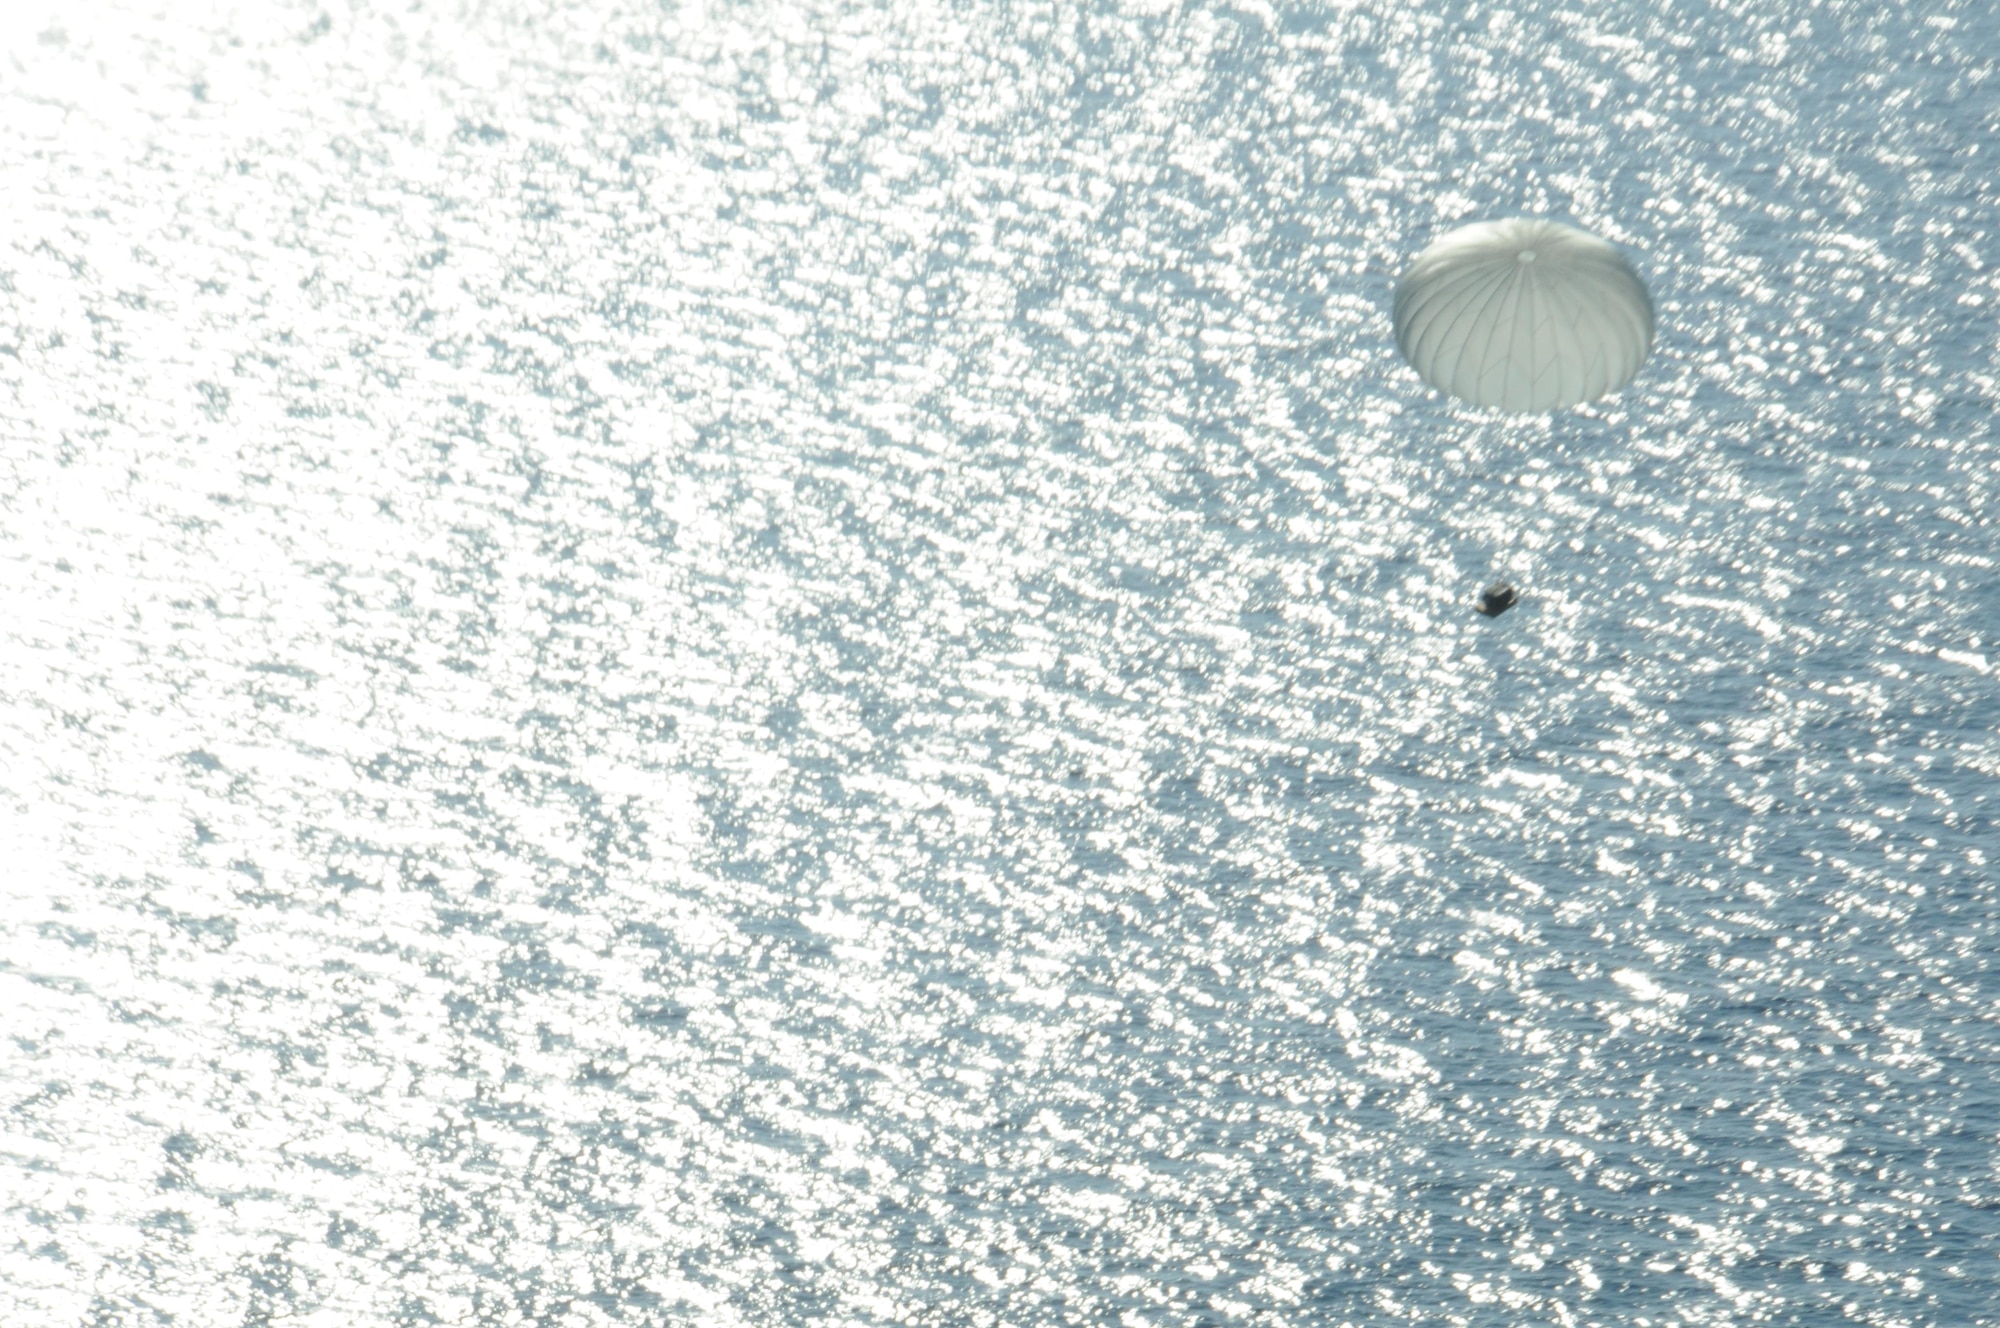 A pallet floats down into the Pacific Ocean on Jan. 31, 2016. The pallet was dropped from a C-130 Hercules during a concept operation completed by the 94th Airlift Wing and Joint Partners. (U.S. Air Force Photo by Senior Airman Miles Wilson)